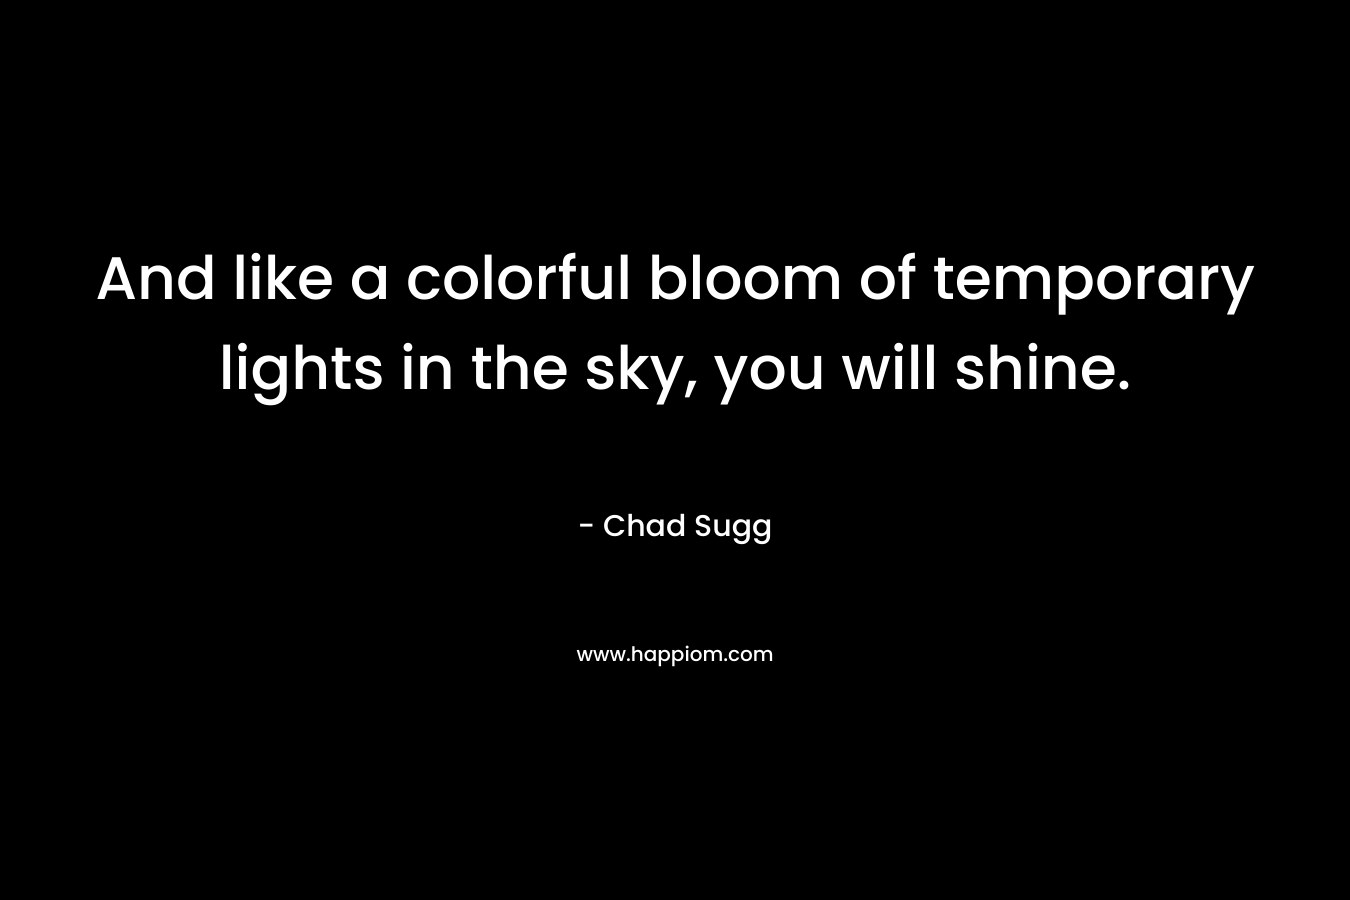 And like a colorful bloom of temporary lights in the sky, you will shine.